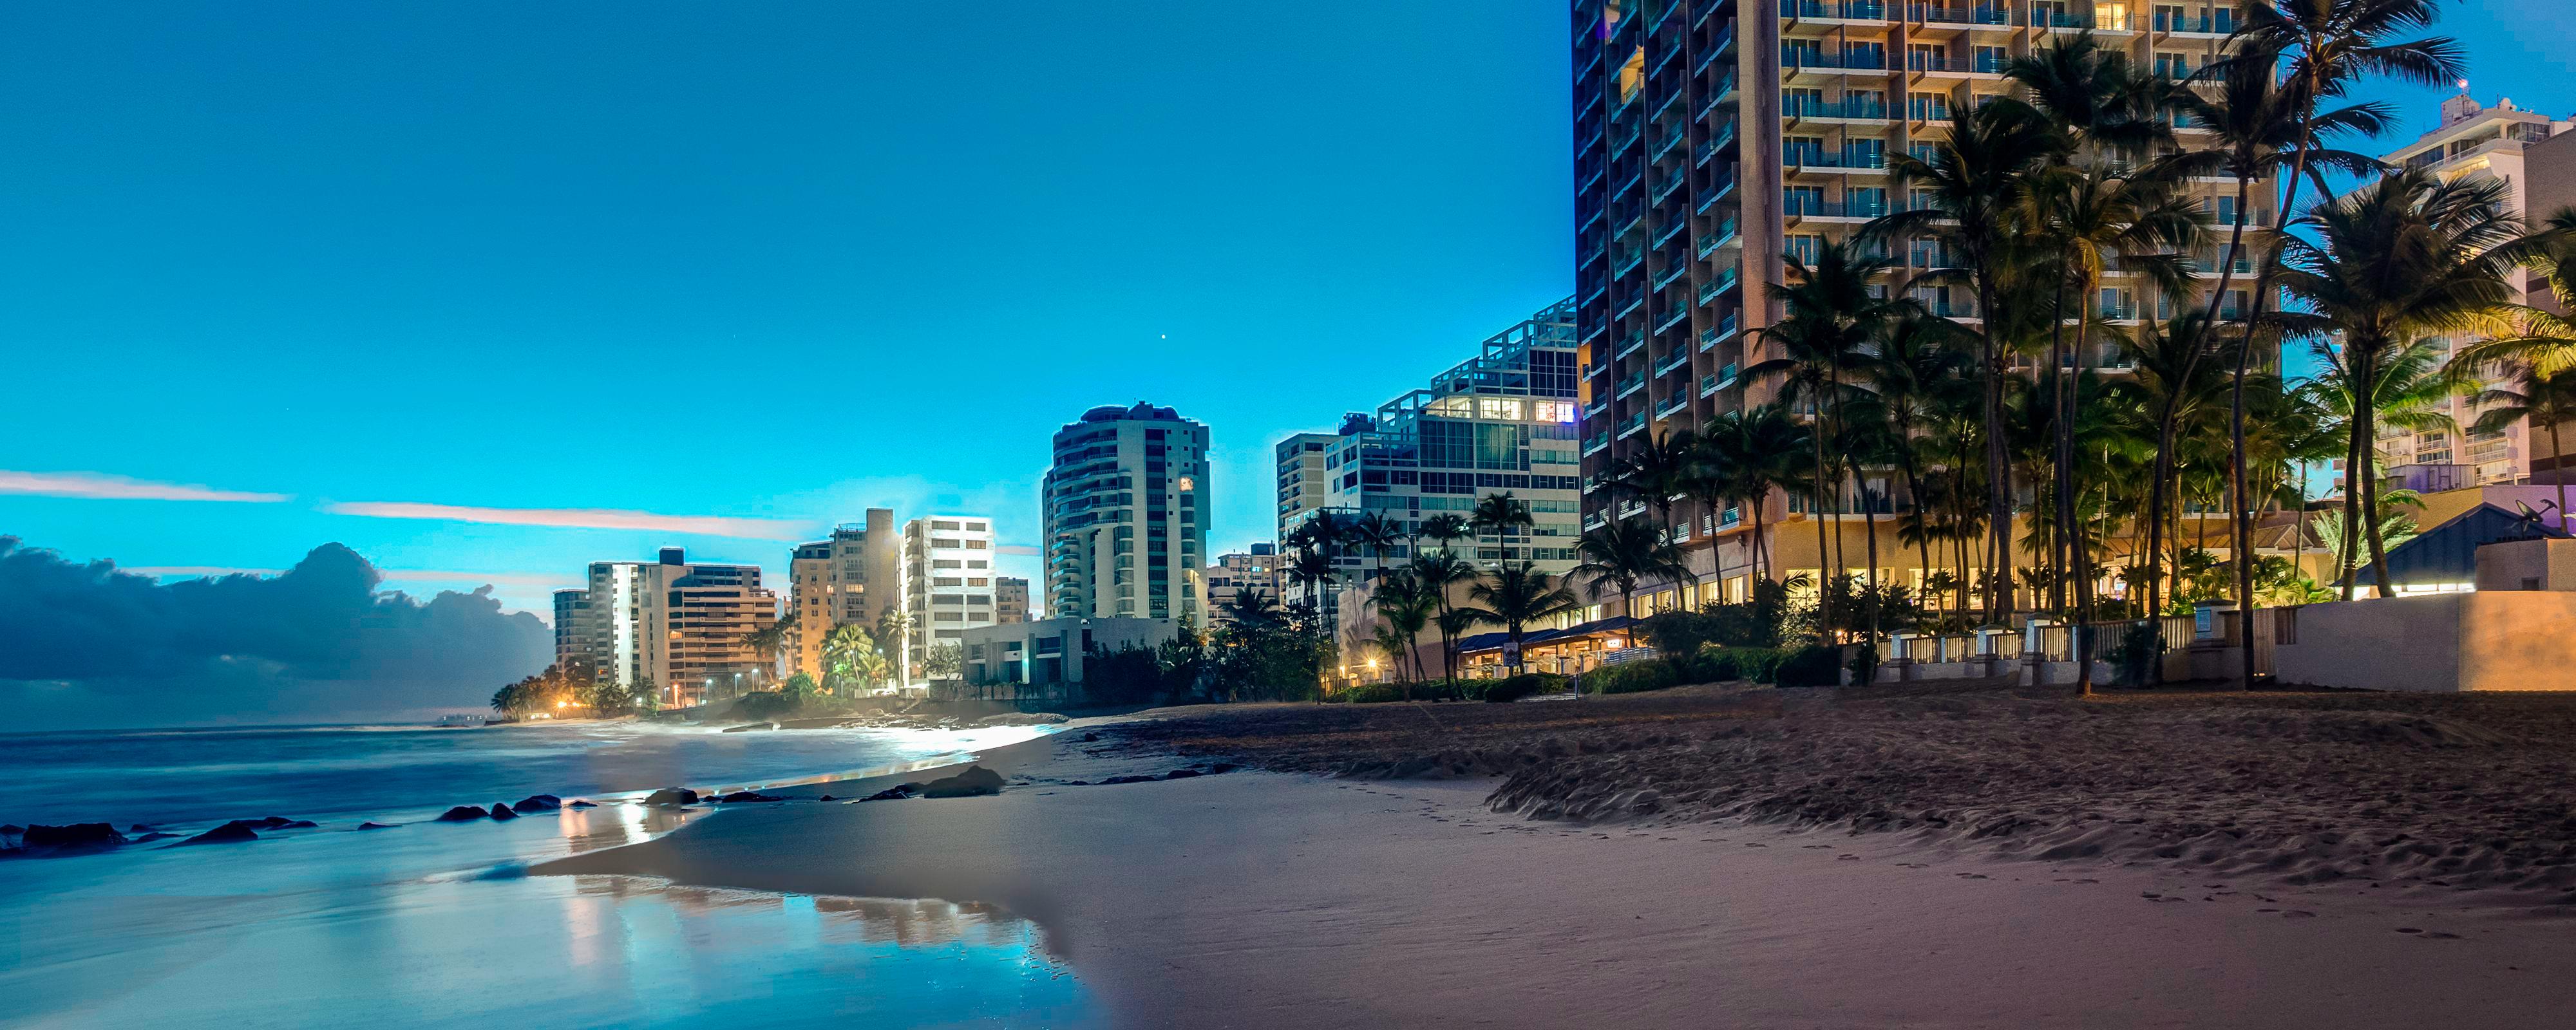 The best hotels, resorts, restaurants, bars, things to do & beaches in Condado